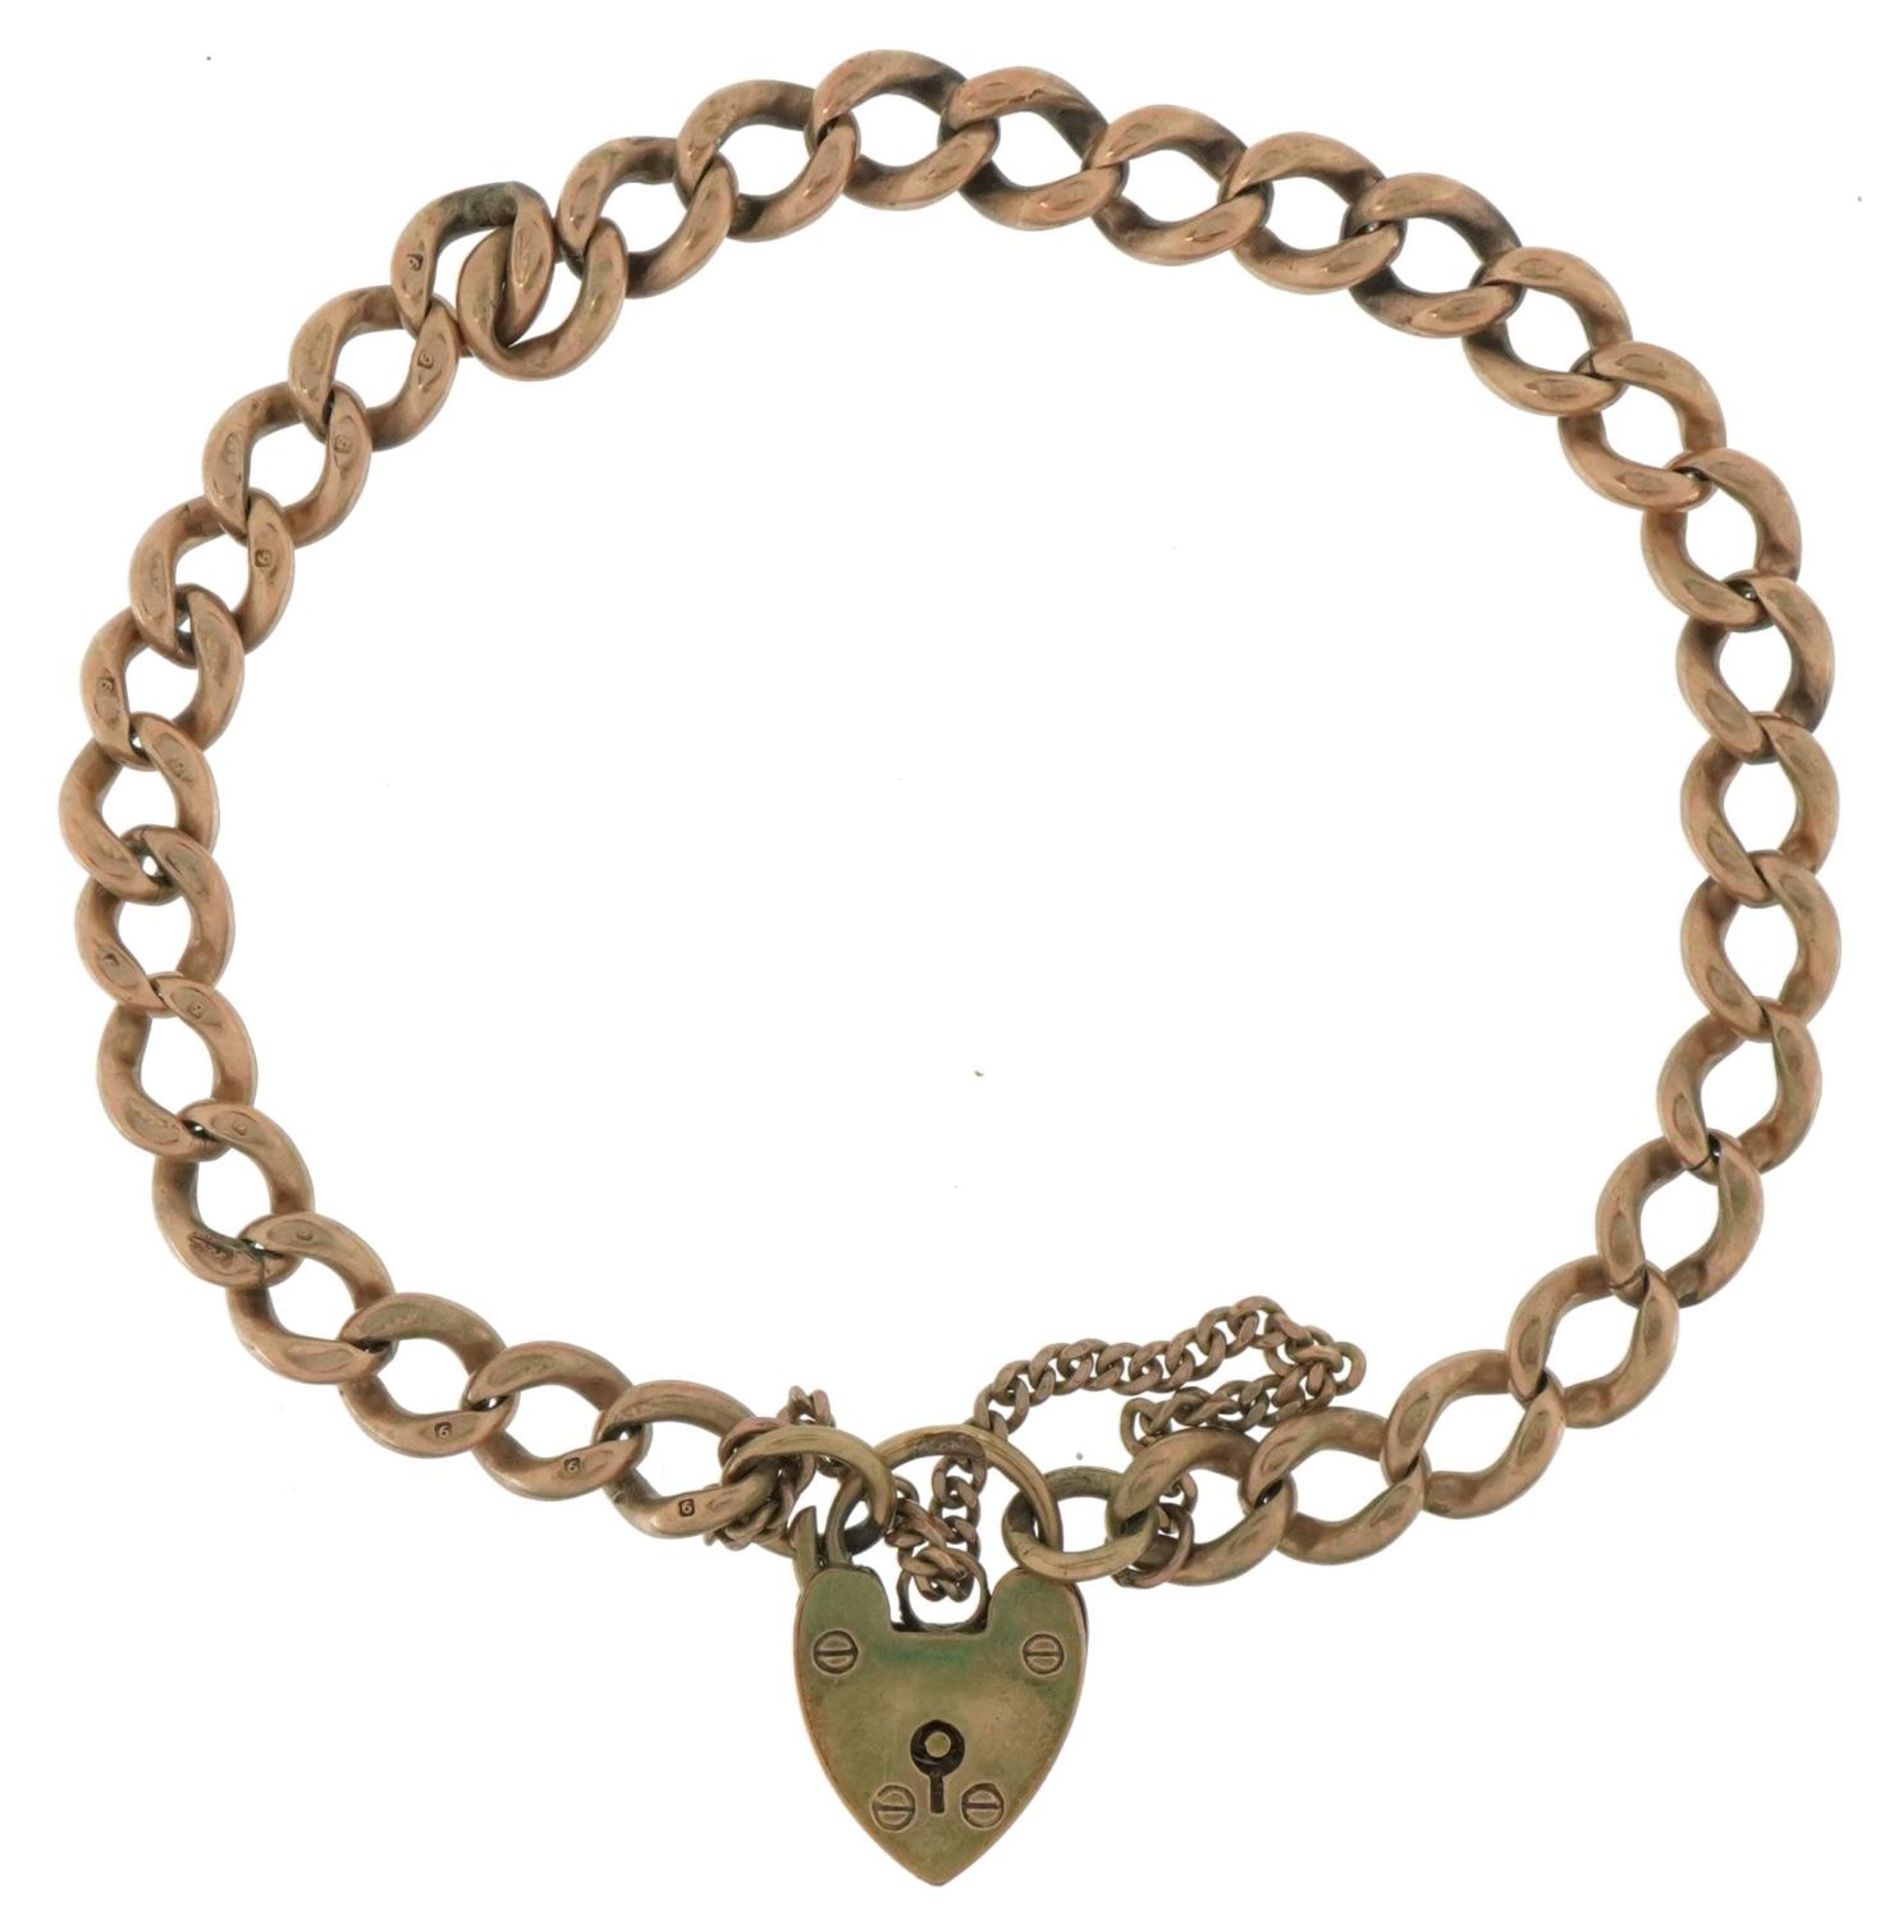 9ct rose gold bracelet with 9ct gold love heart padlock 18cm in length, 17.0g : For further